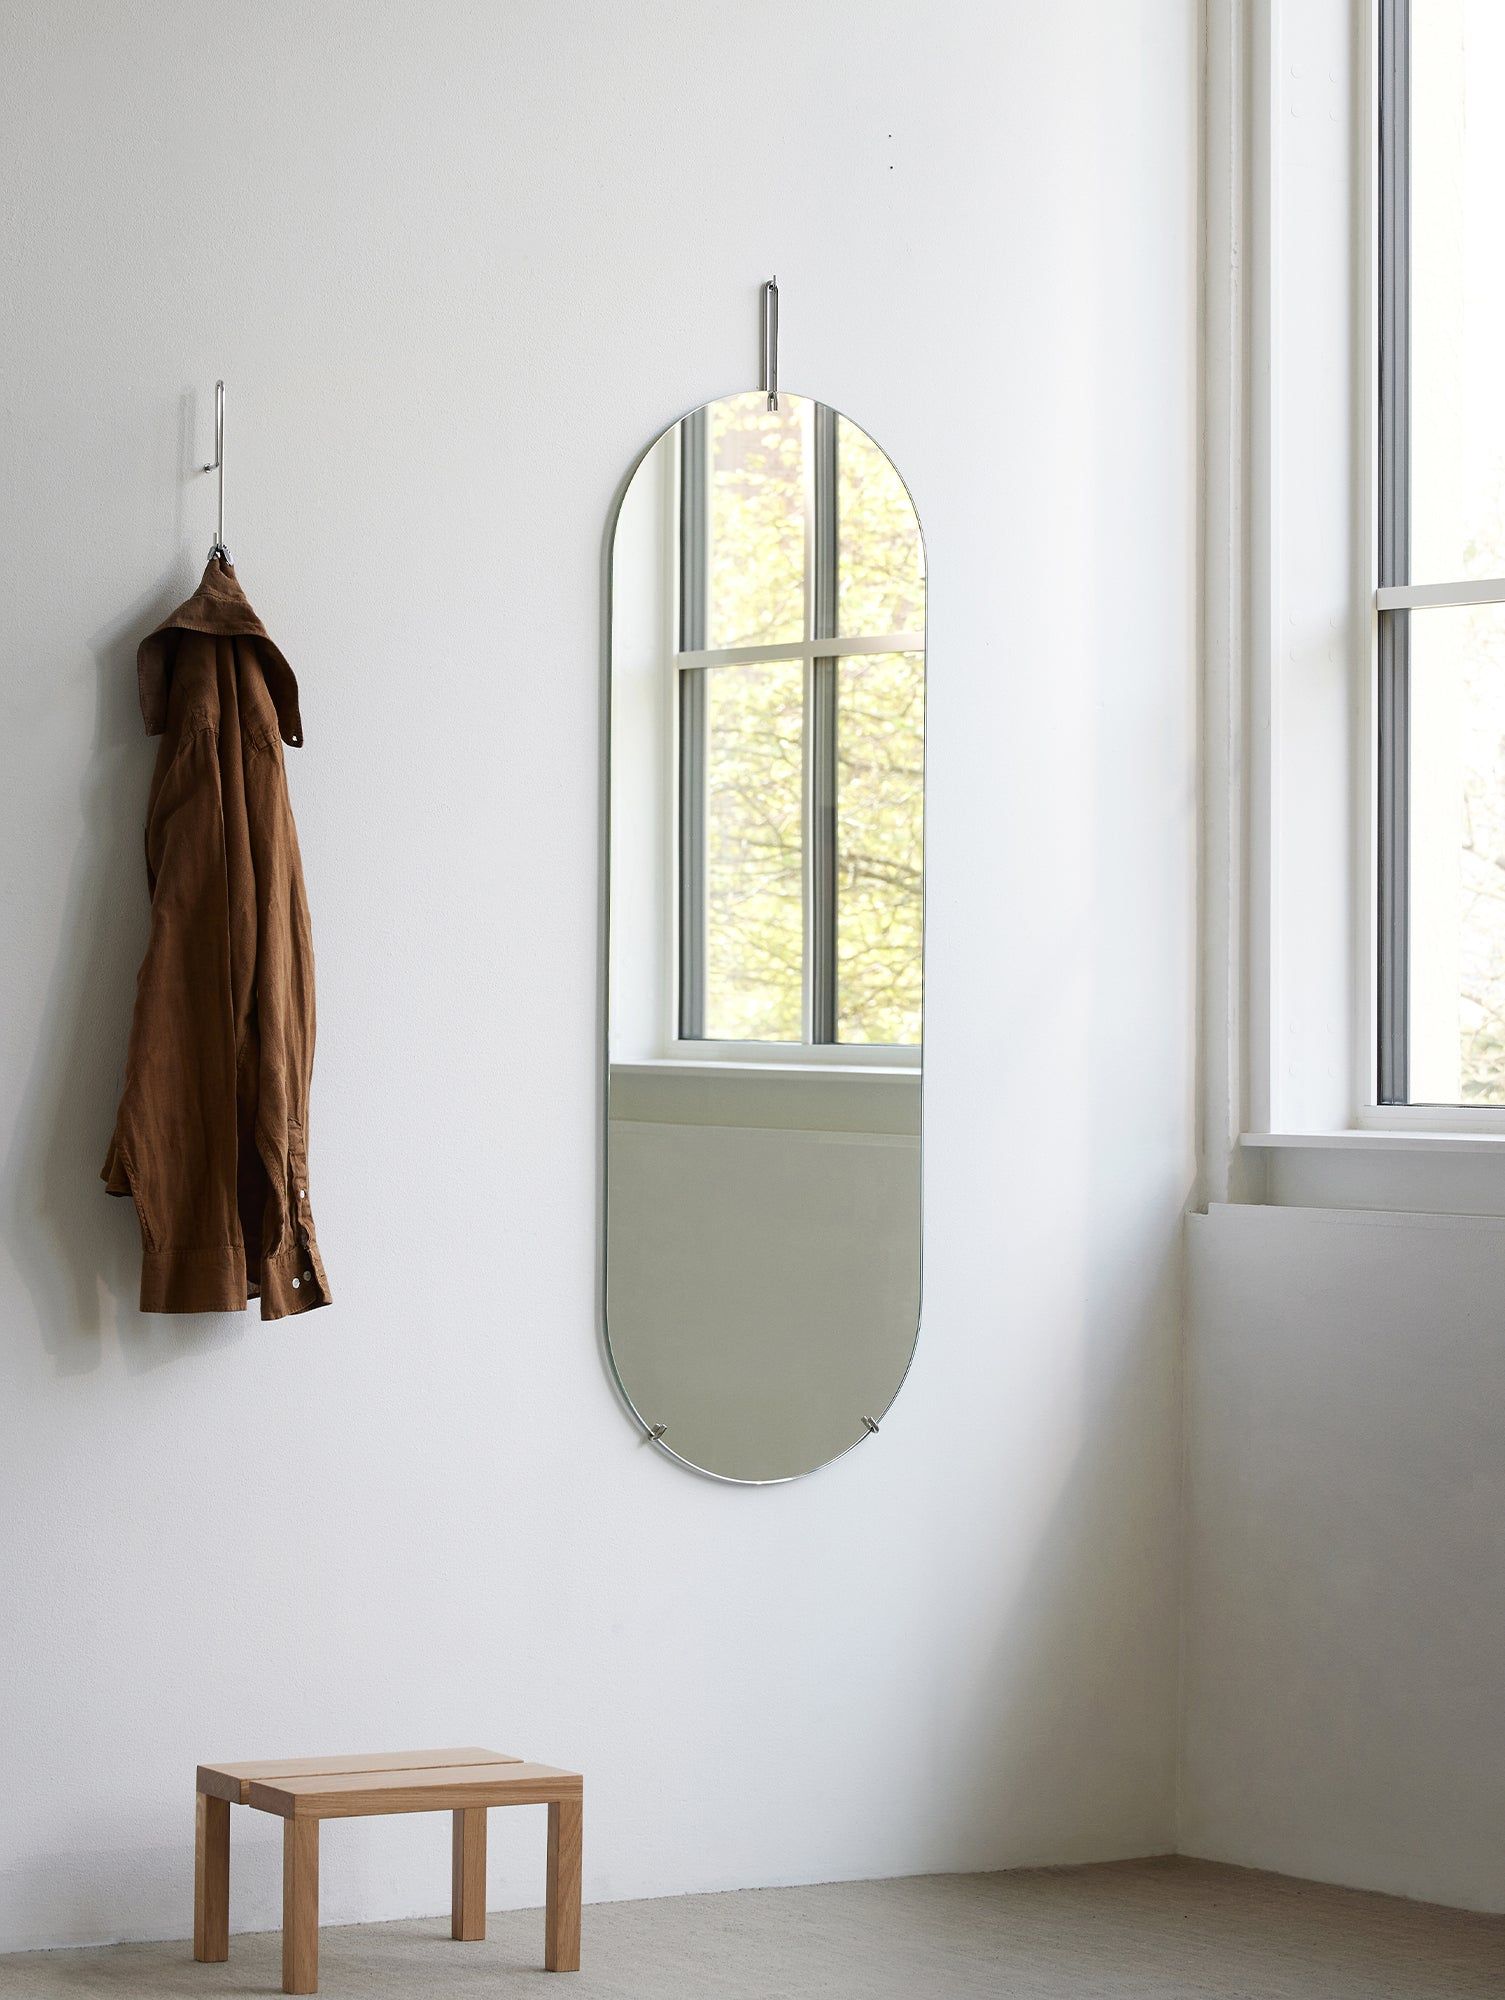 Hallway Mirror Enhance Your Entryway with a Stylish Reflection